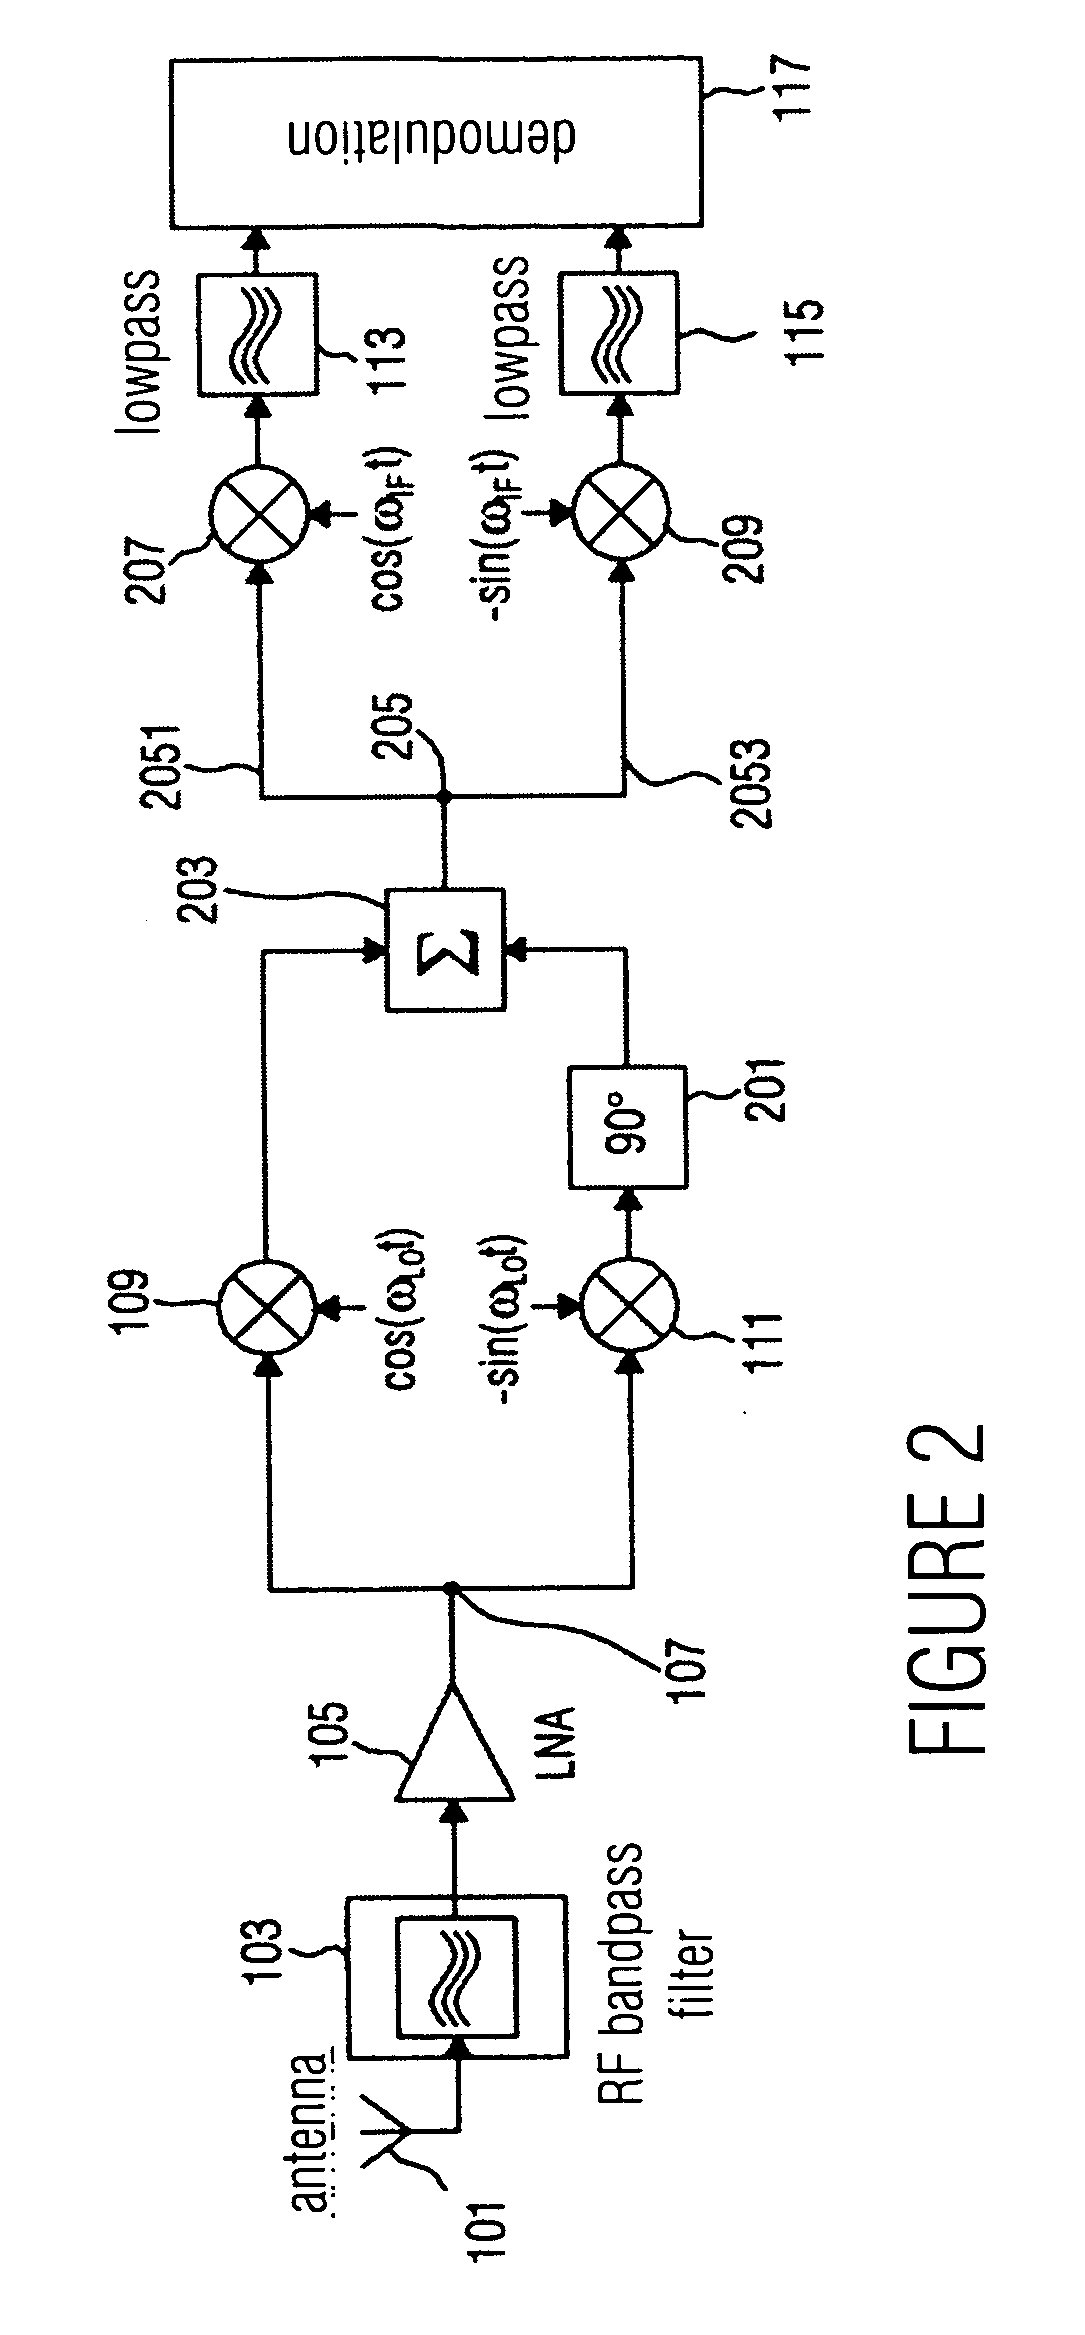 Apparatus and method for downward mixing an input signal into an output signal